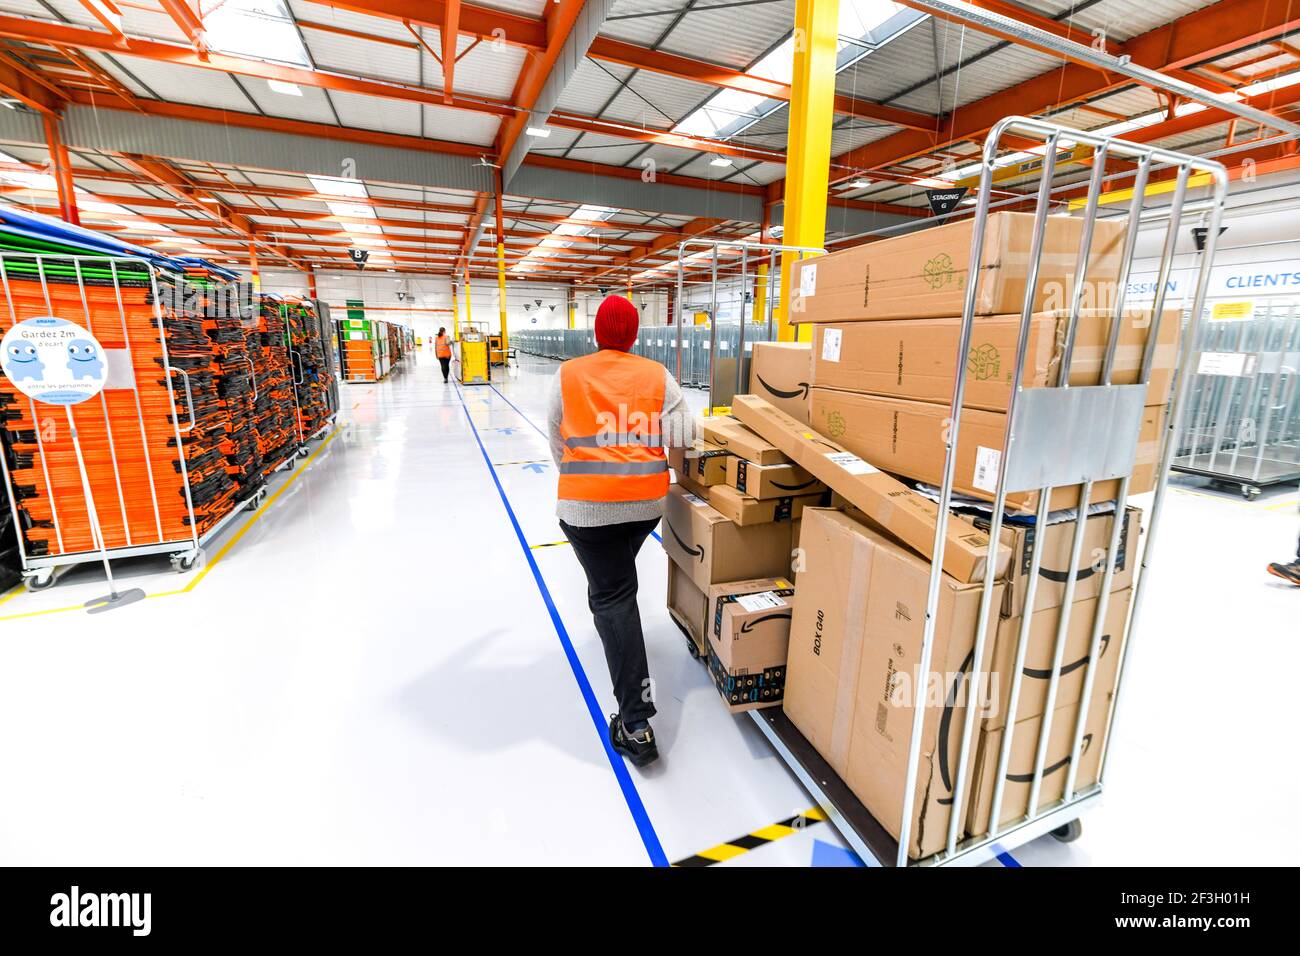 Amazon fulfillment center in Saint-Etienne-du-Rouvray (Normandy, northern France) Stock Photo